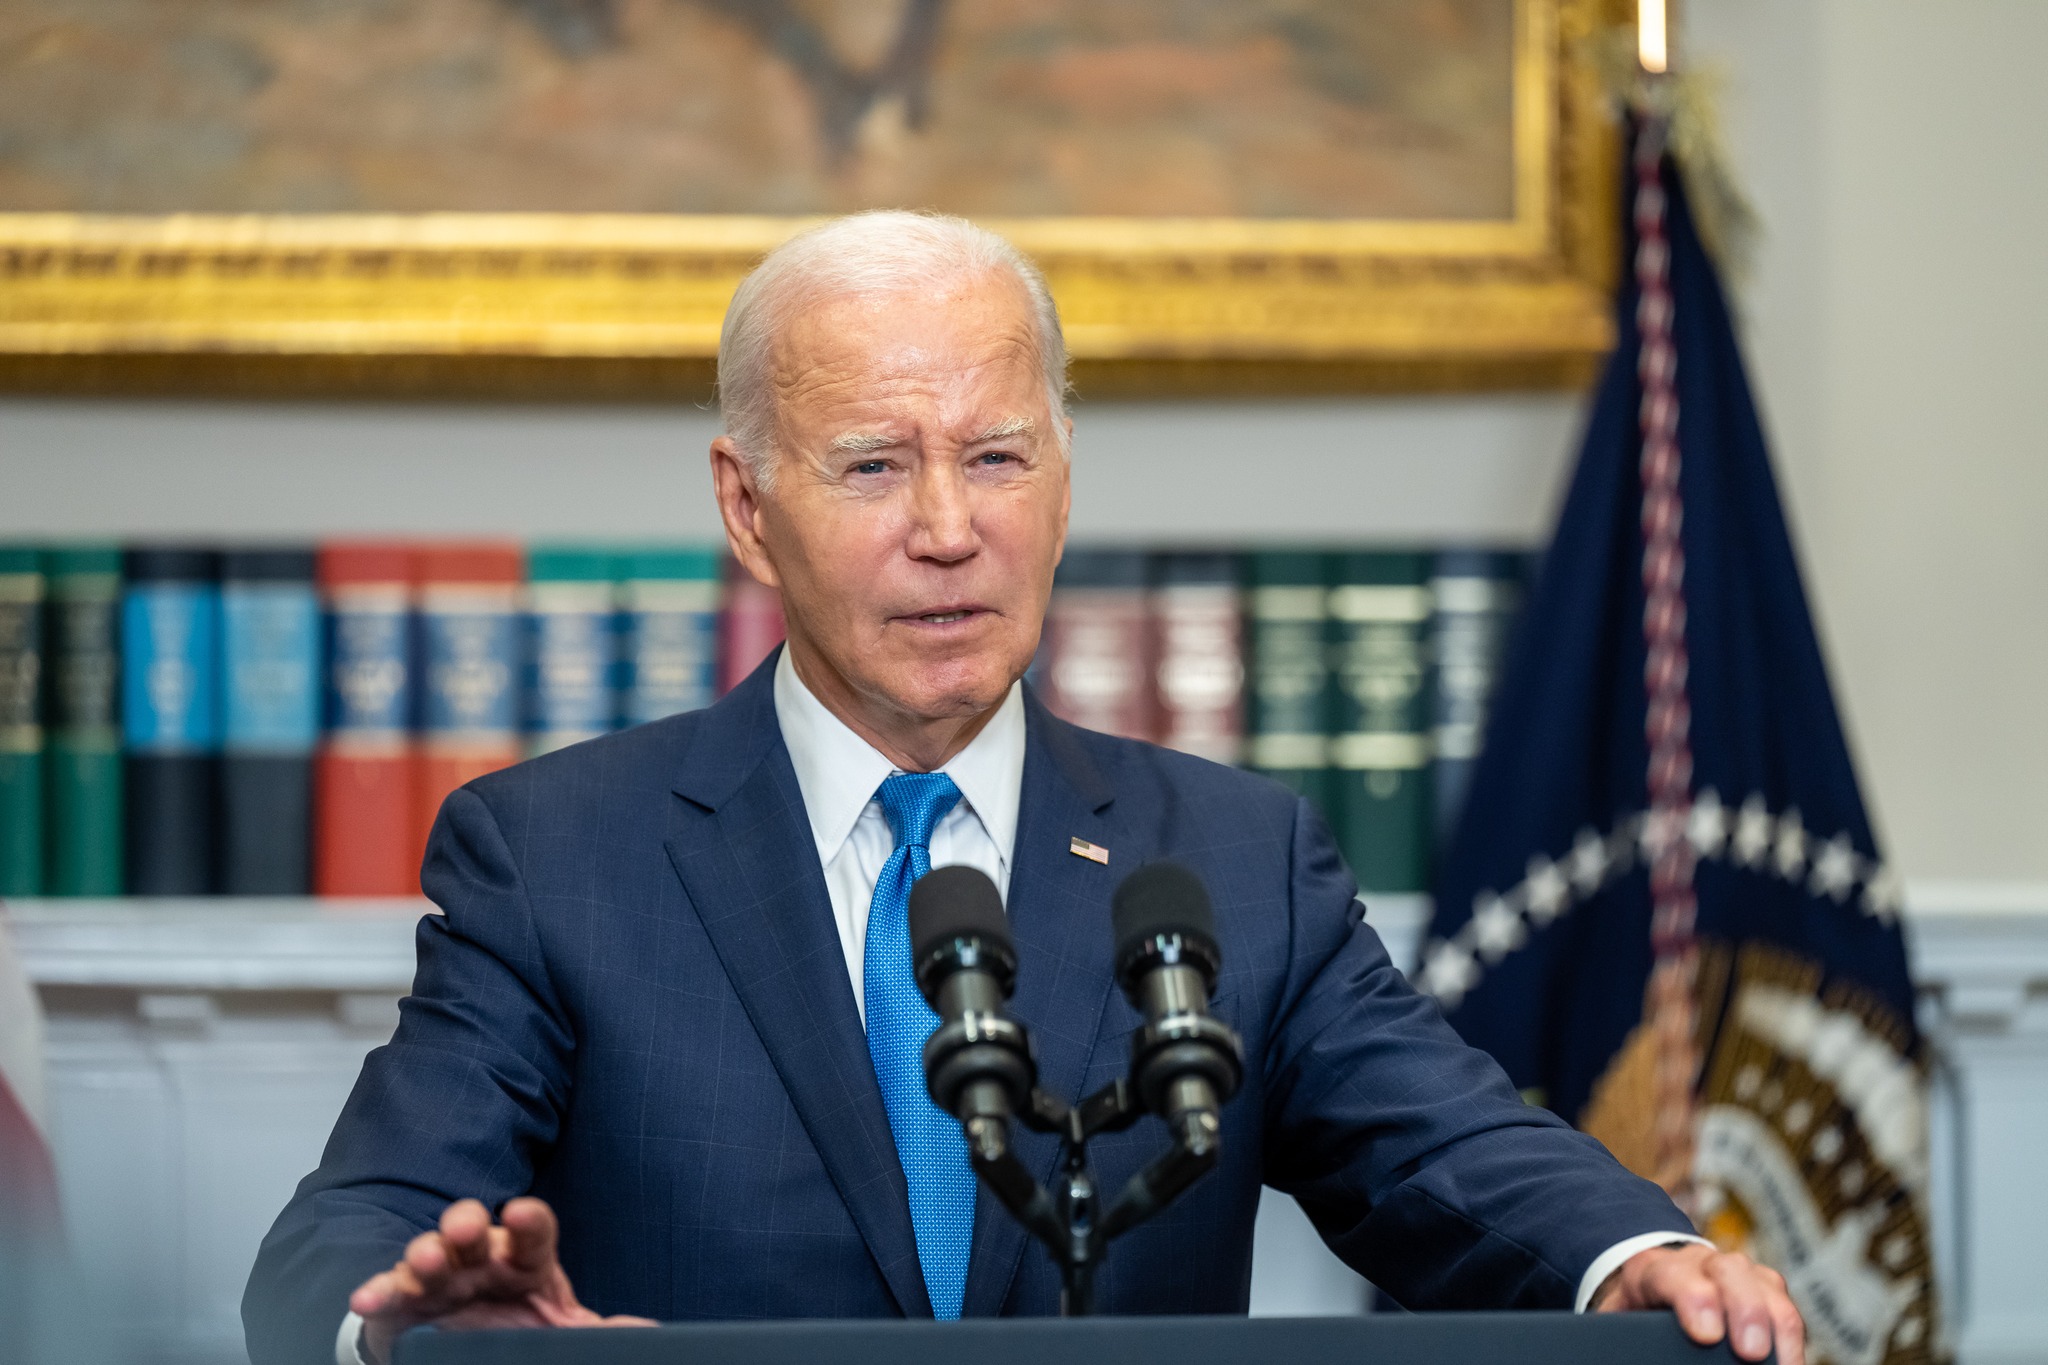 Biden with books in background in the Roosevelt Room